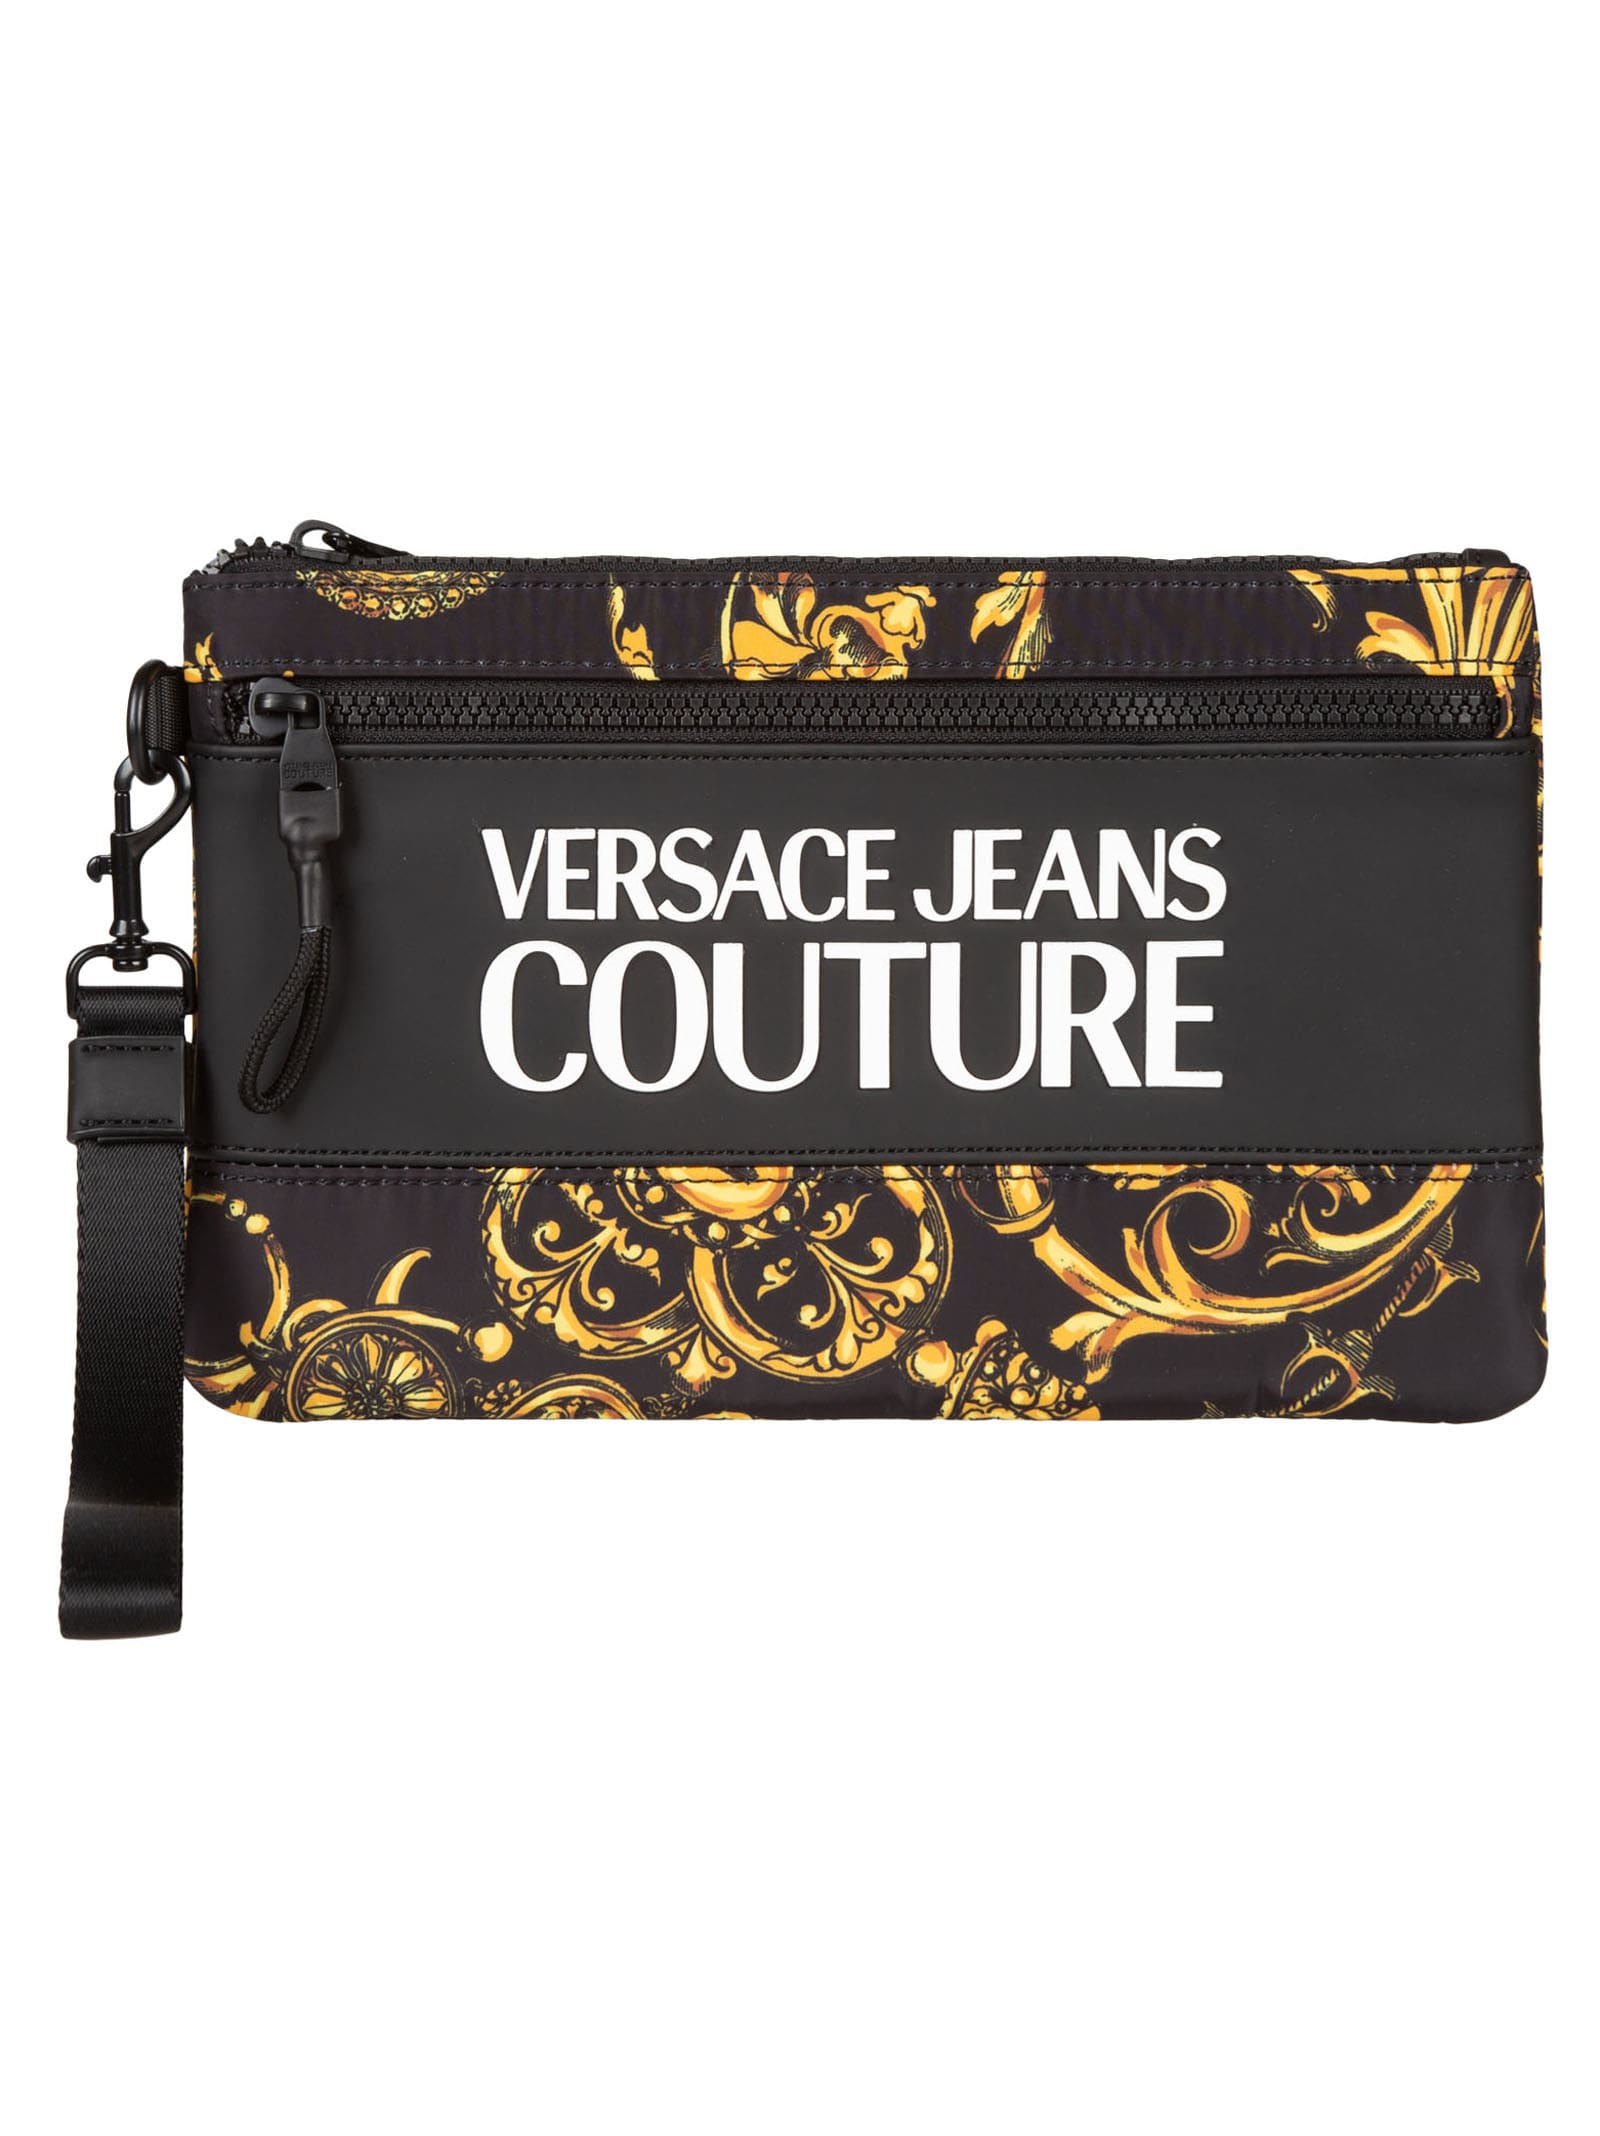 Versace Jeans Couture Logo Print Clutch